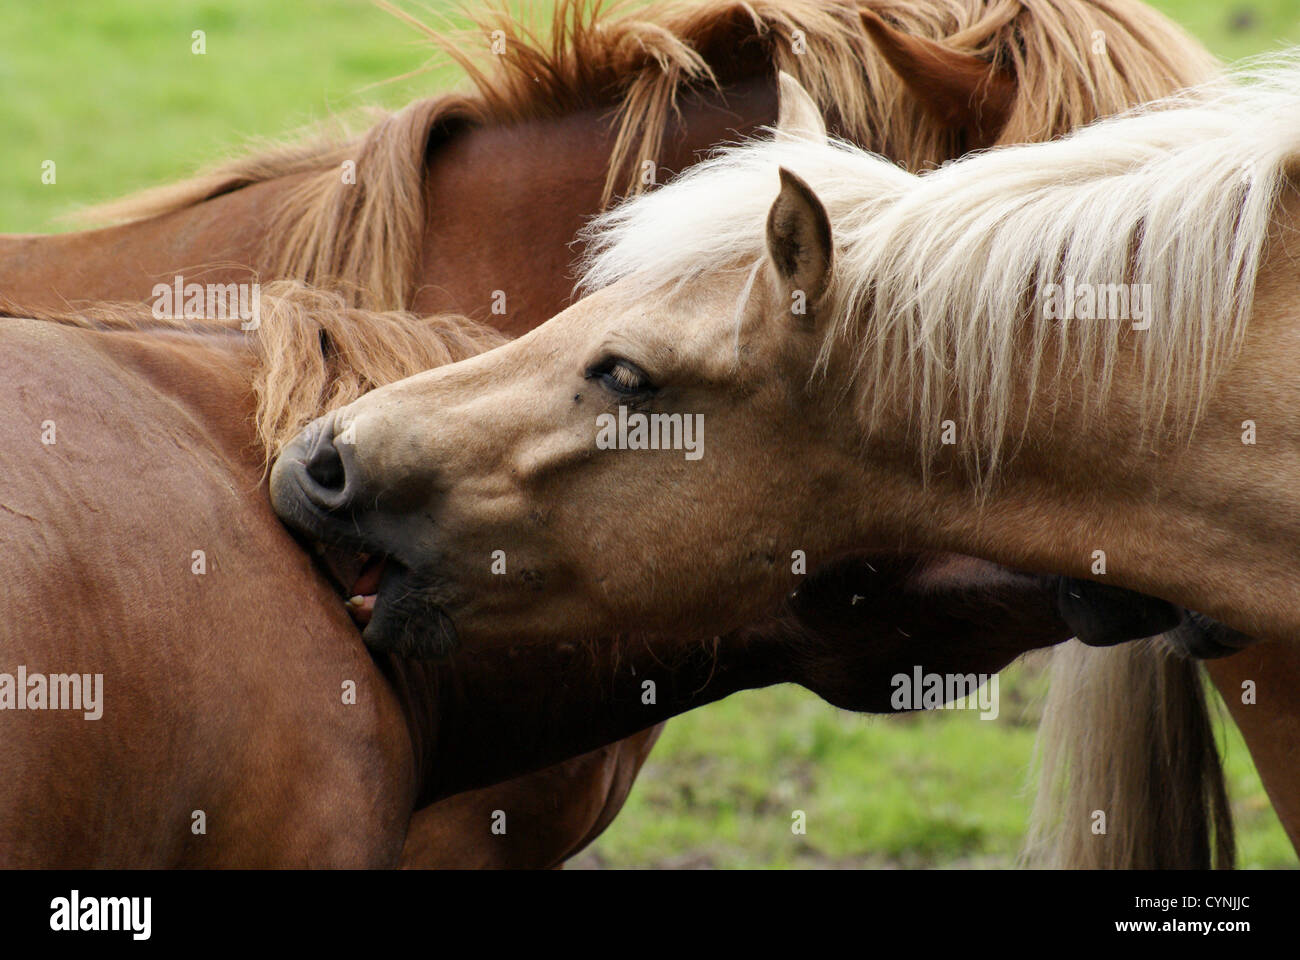 Wild Horses grooming each other Stock Photo